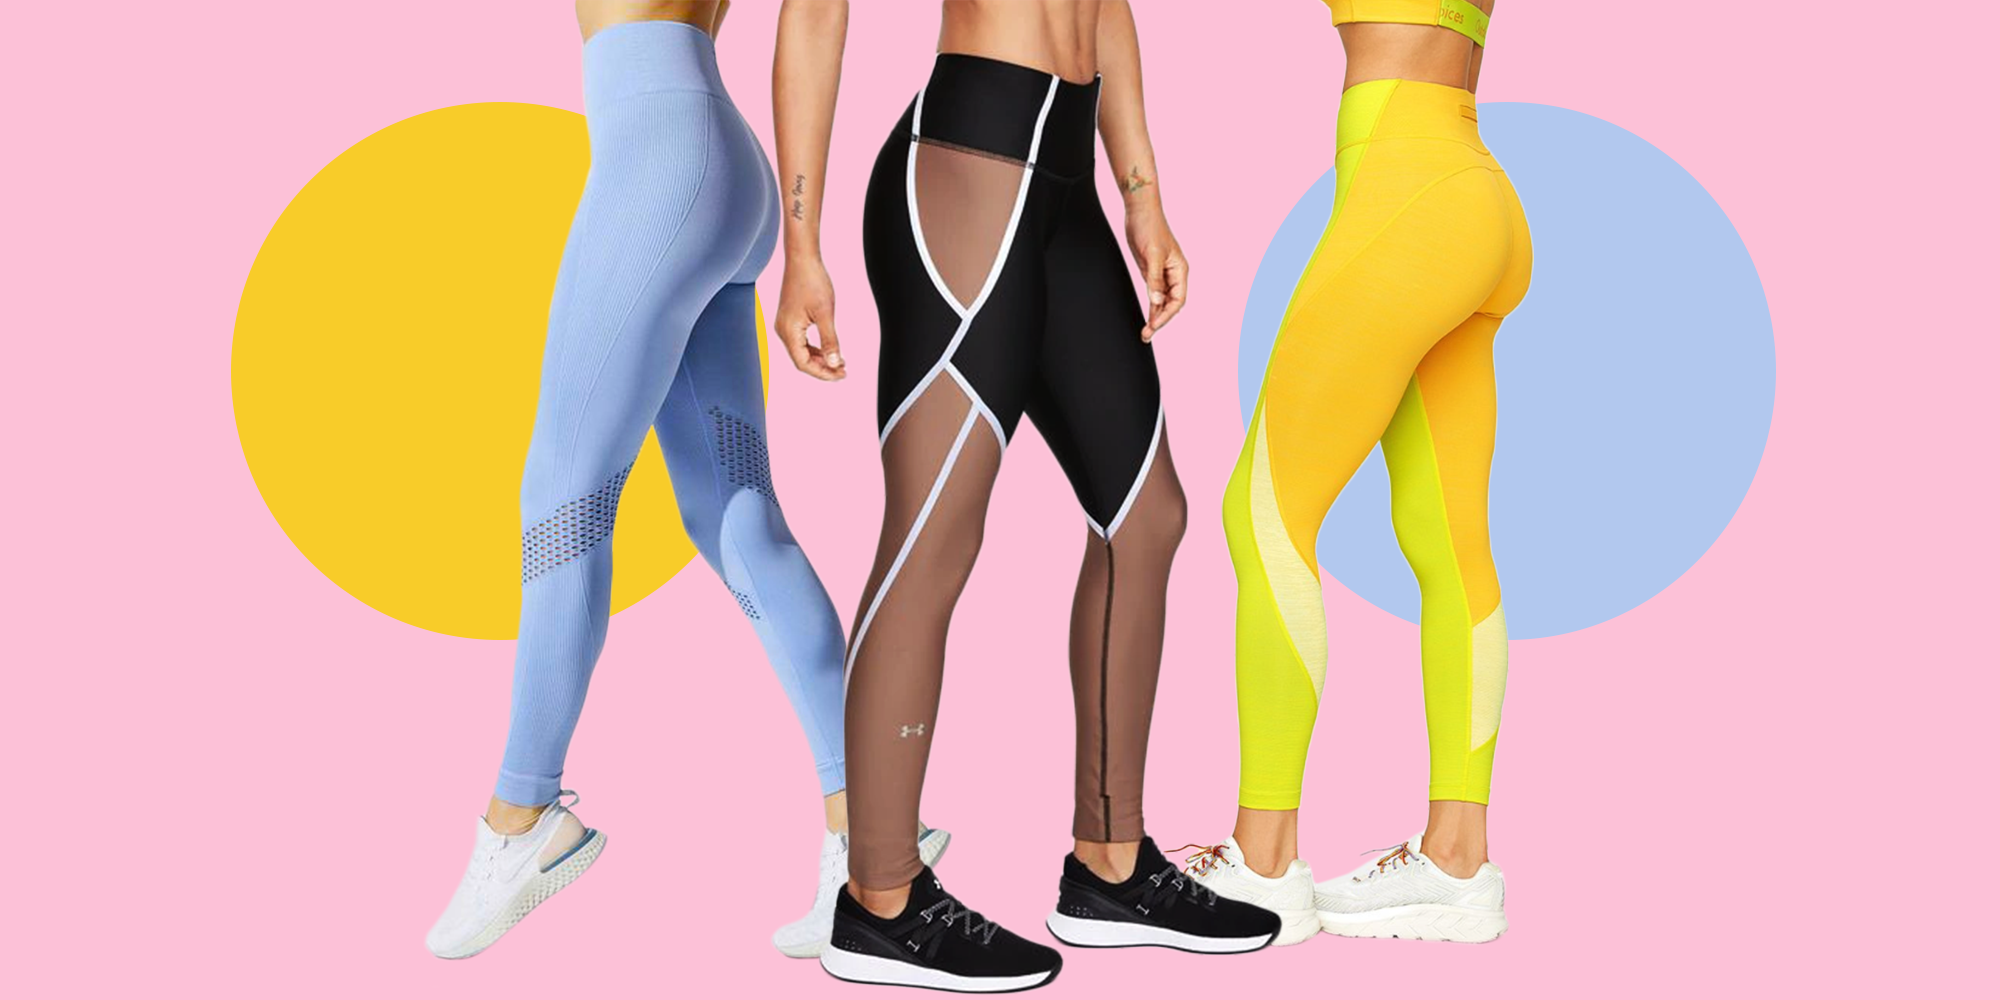 Shop the best leggings brands out there, according to Who What Wear's  editors. | Lace up leggings, Best leggings, Active wear leggings